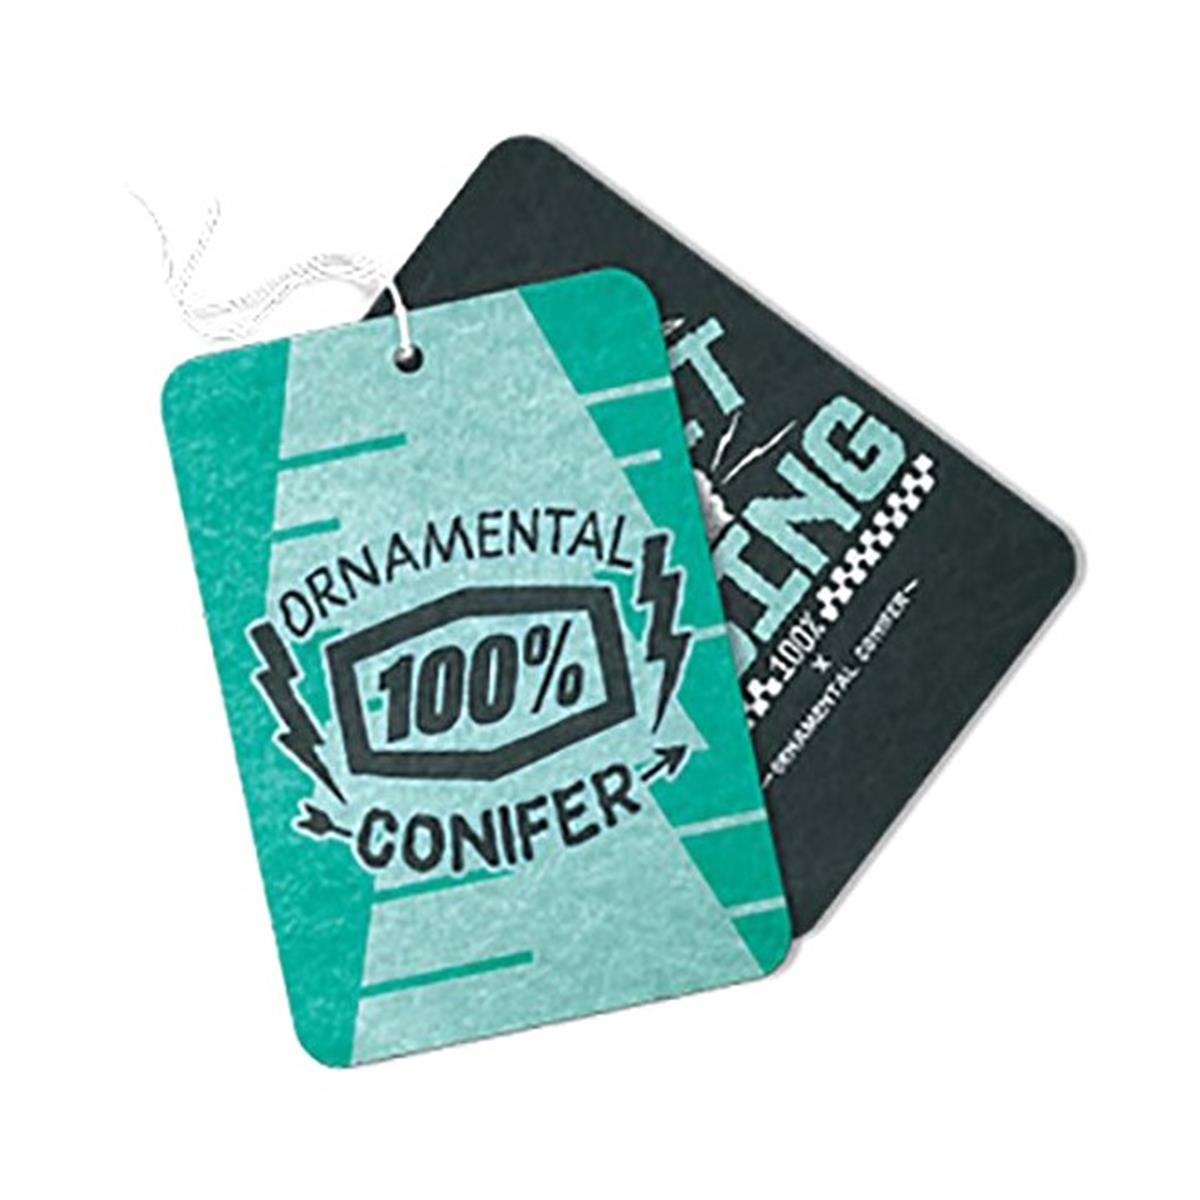 100% Aromatic Tags Conifer Teal